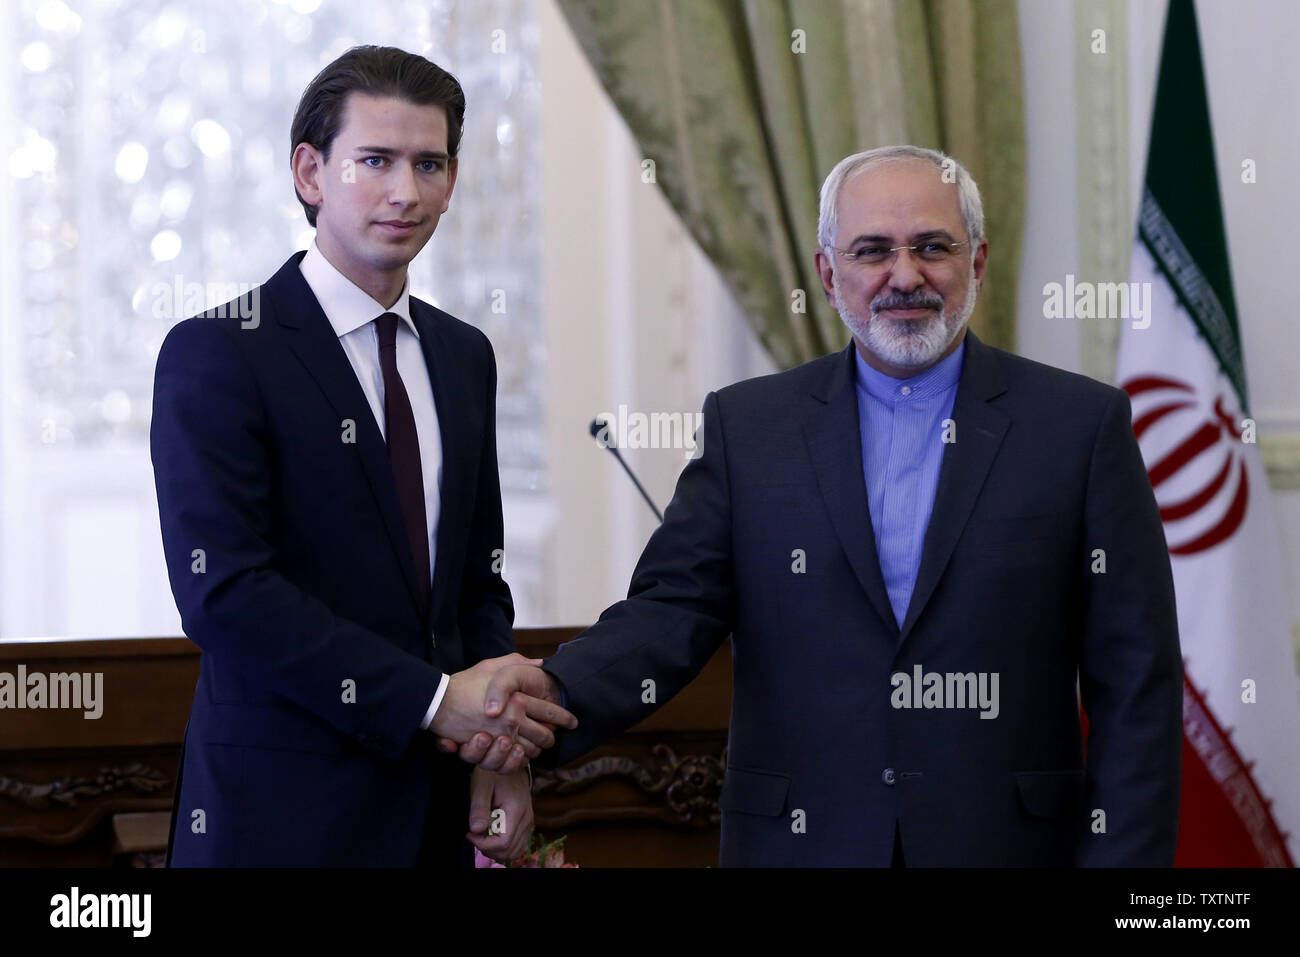 Iranian Foreign Minister Mohamad Javad Zarif  (R) shakes hands with his Austrian counterpart Sebastian Kurz (L) after their joint press conference  in Tehran, Iran, April 27, 2014. Austria’s President Heinz Fischer is expected to pay a visit to Iran in the near future, first head of a western state to visit Iran for many years.  UPI/Maryam Rahmanian Stock Photo